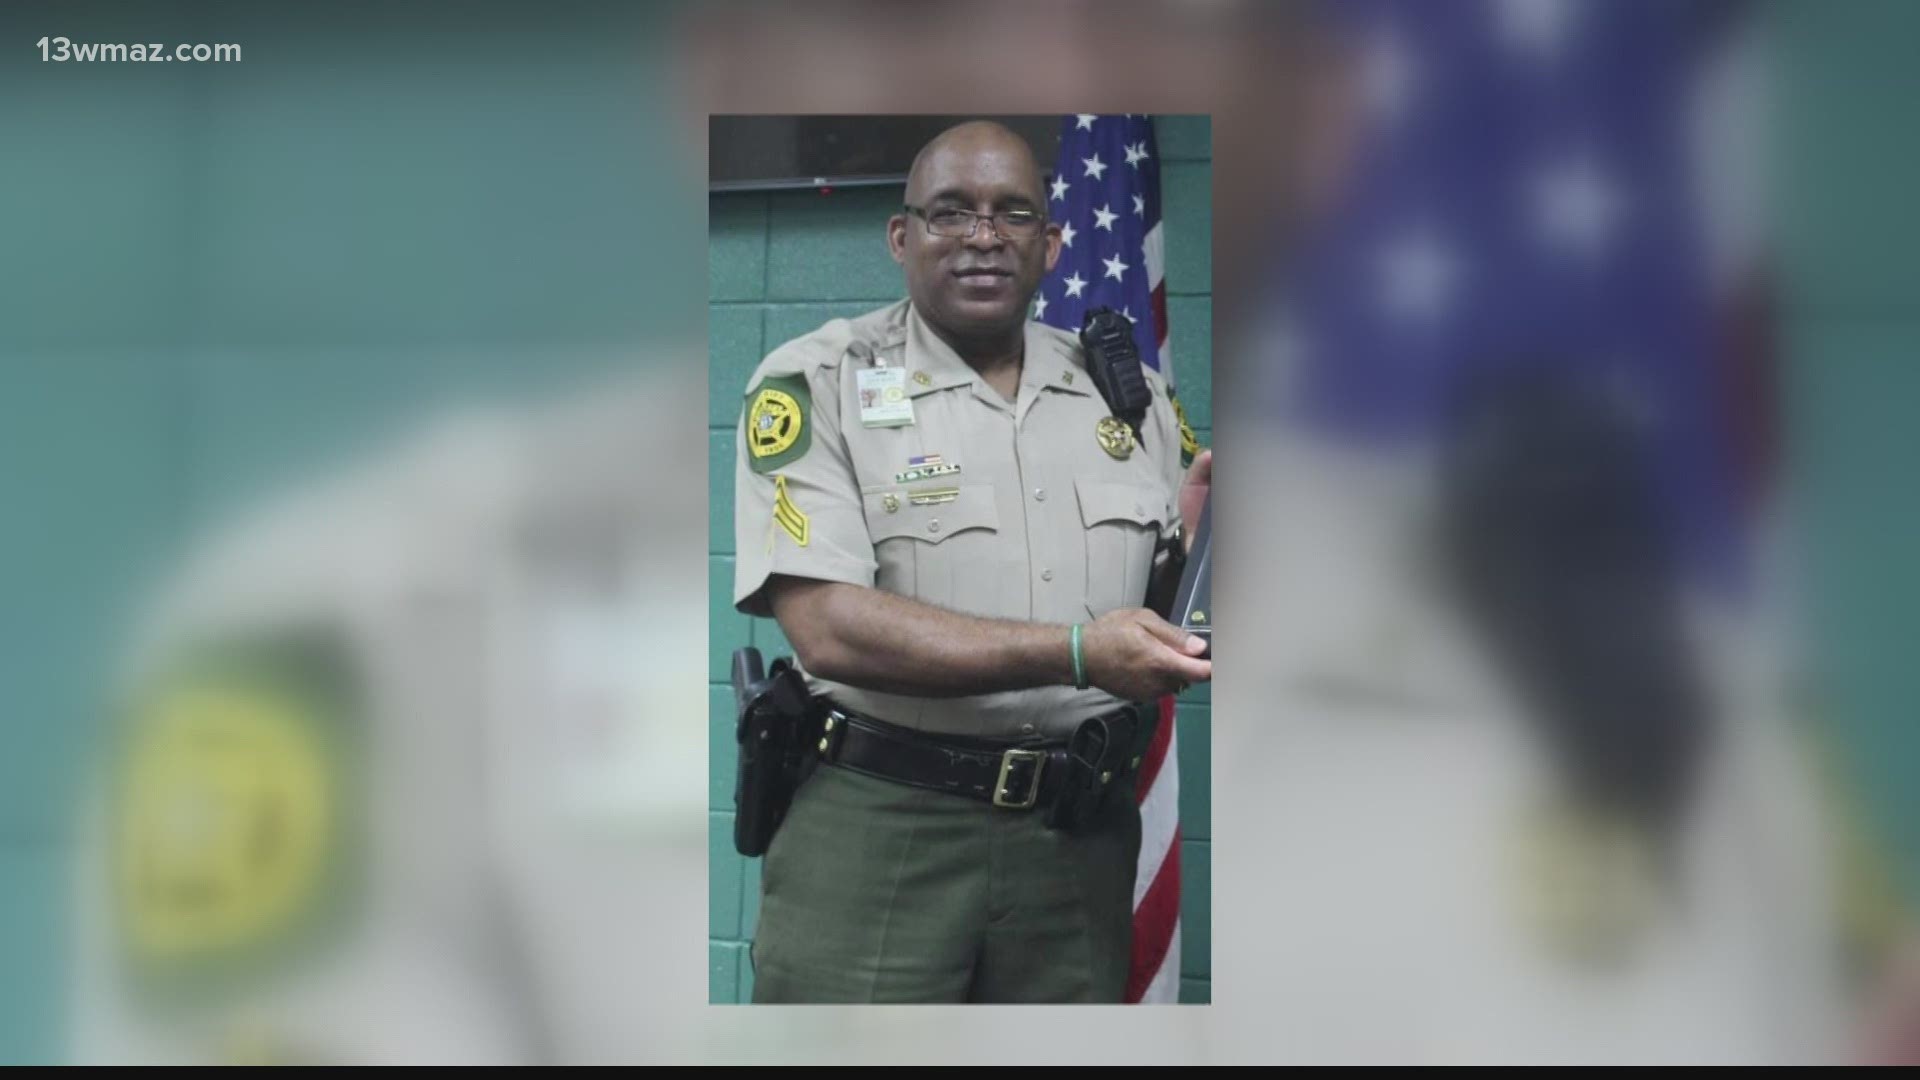 Over the weekend, 50-year-old sheriff’s deputy Corporal Avery Hillman with the Crisp County Sheriff's Office died from complications of COVID-19.